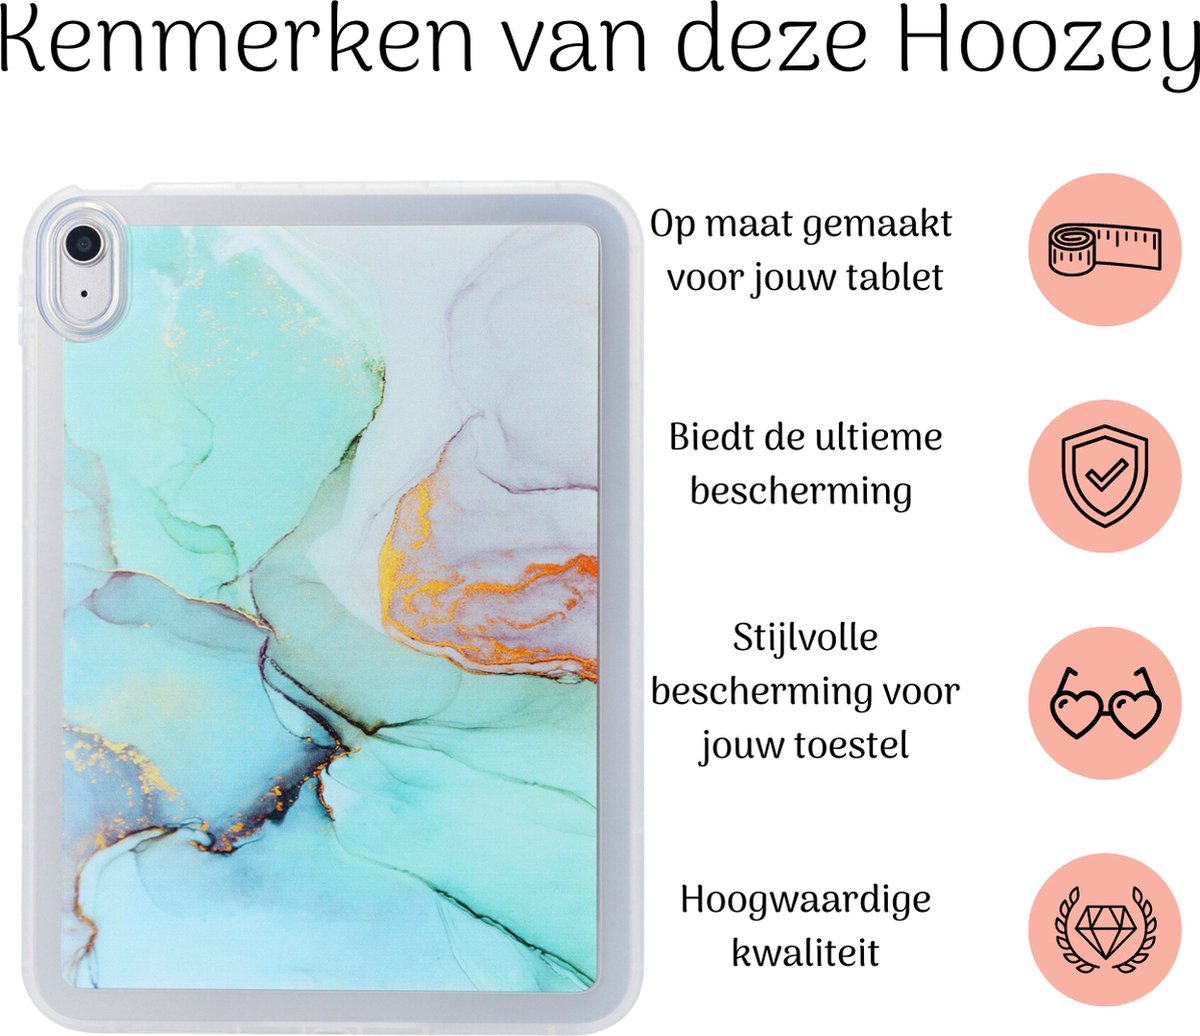 Hoozey - Tablet hoes geschikt voor Samsung Galaxy Tab A8 (2022/2021) - 10.5 inch - Tablet hoes - Marmer print - Turquoise